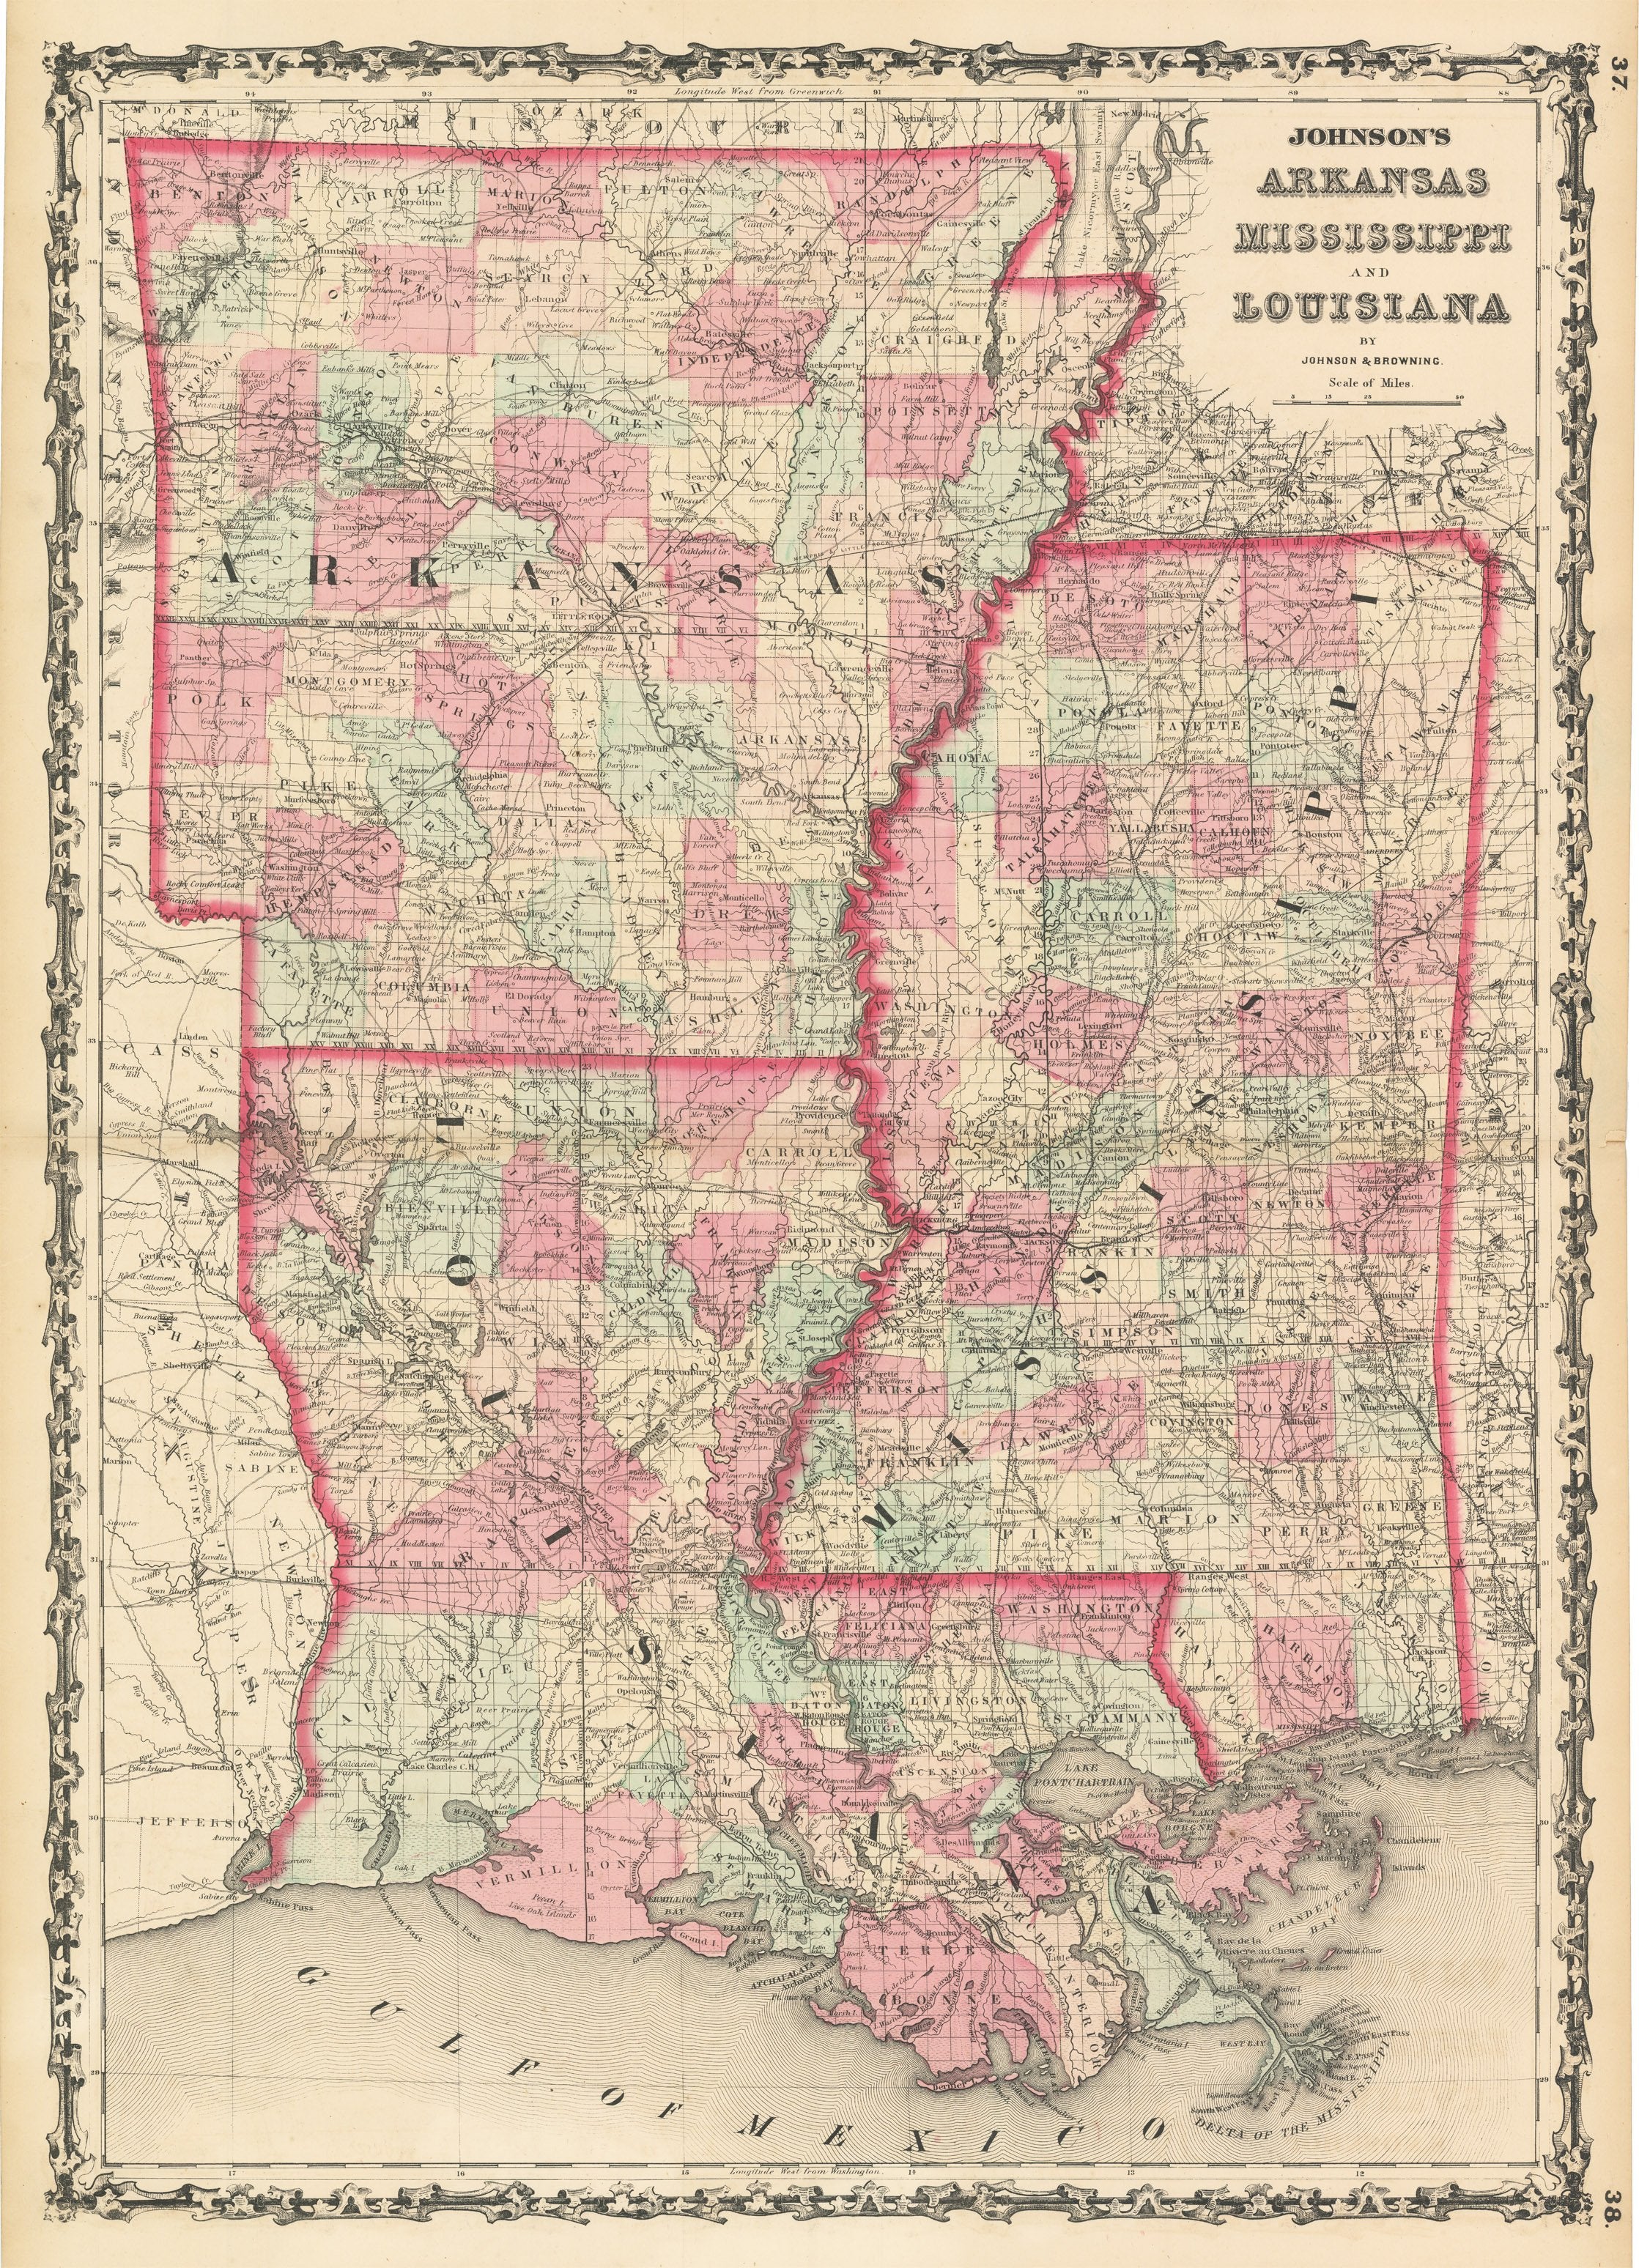 Map of the States of Mississippi, Louisiana, and the Arkansas